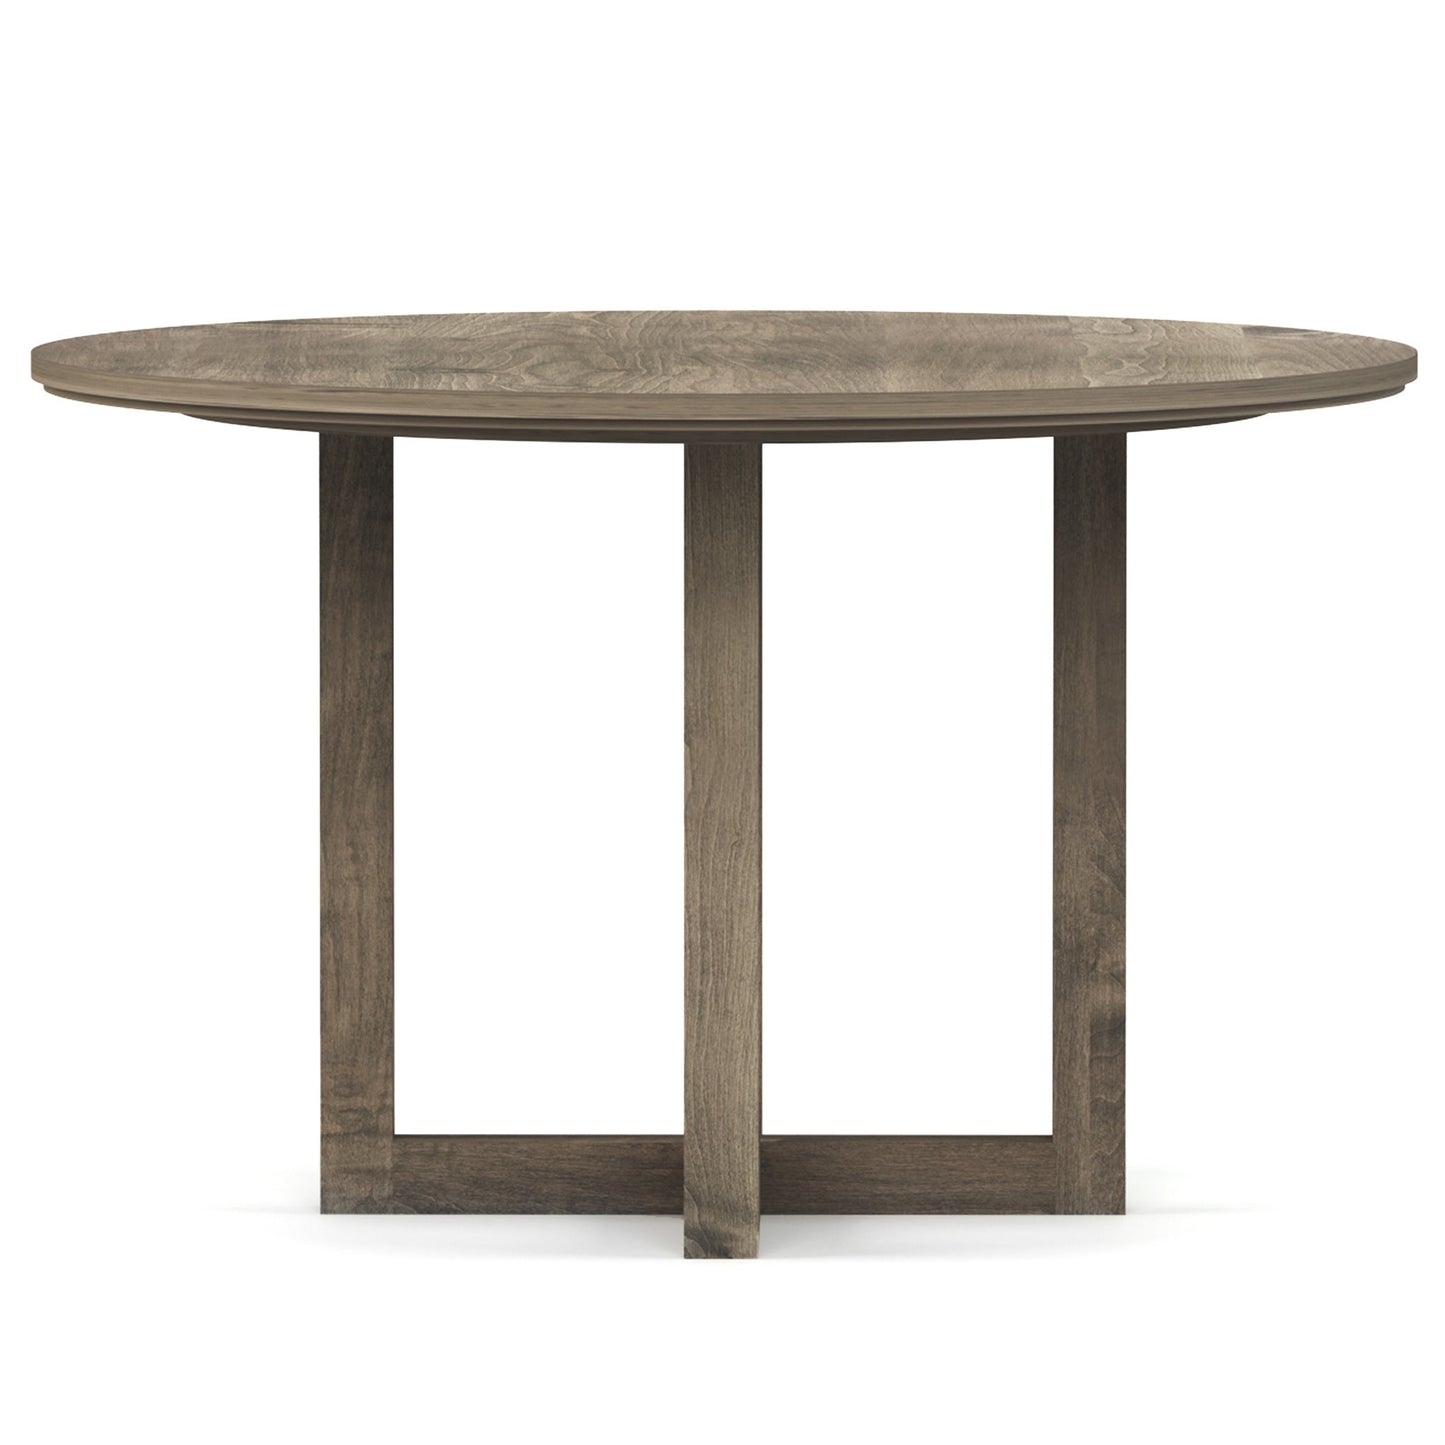 Dwyer 48-inch Round Dining Table